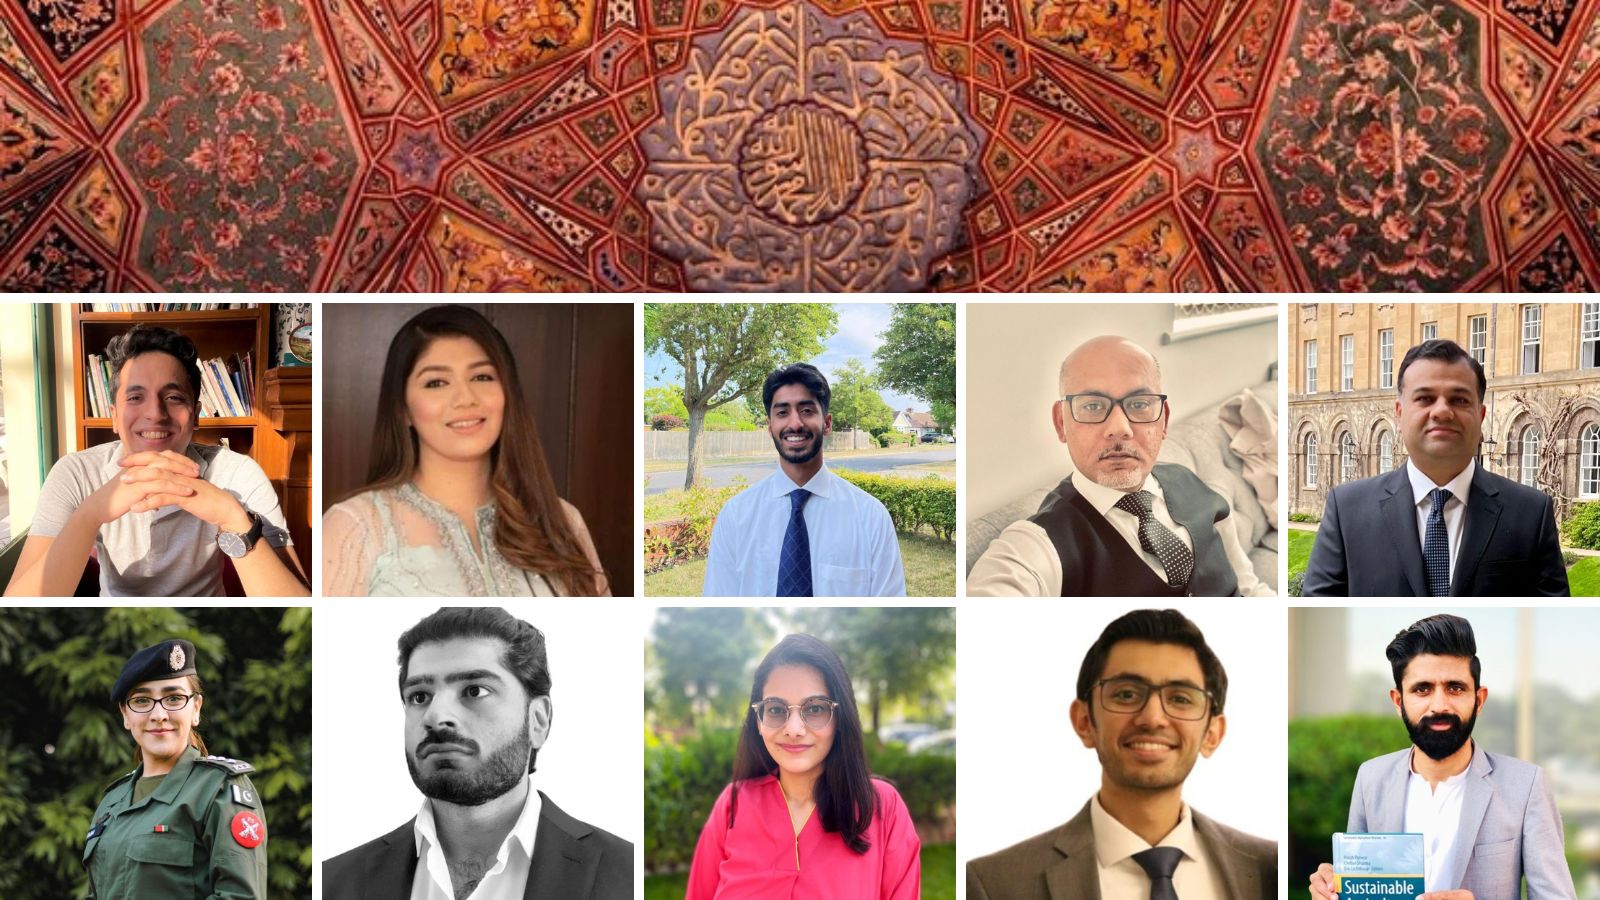 Montage of photos of scholarship holders - 3 women and 7 men, all of Pakistani descent